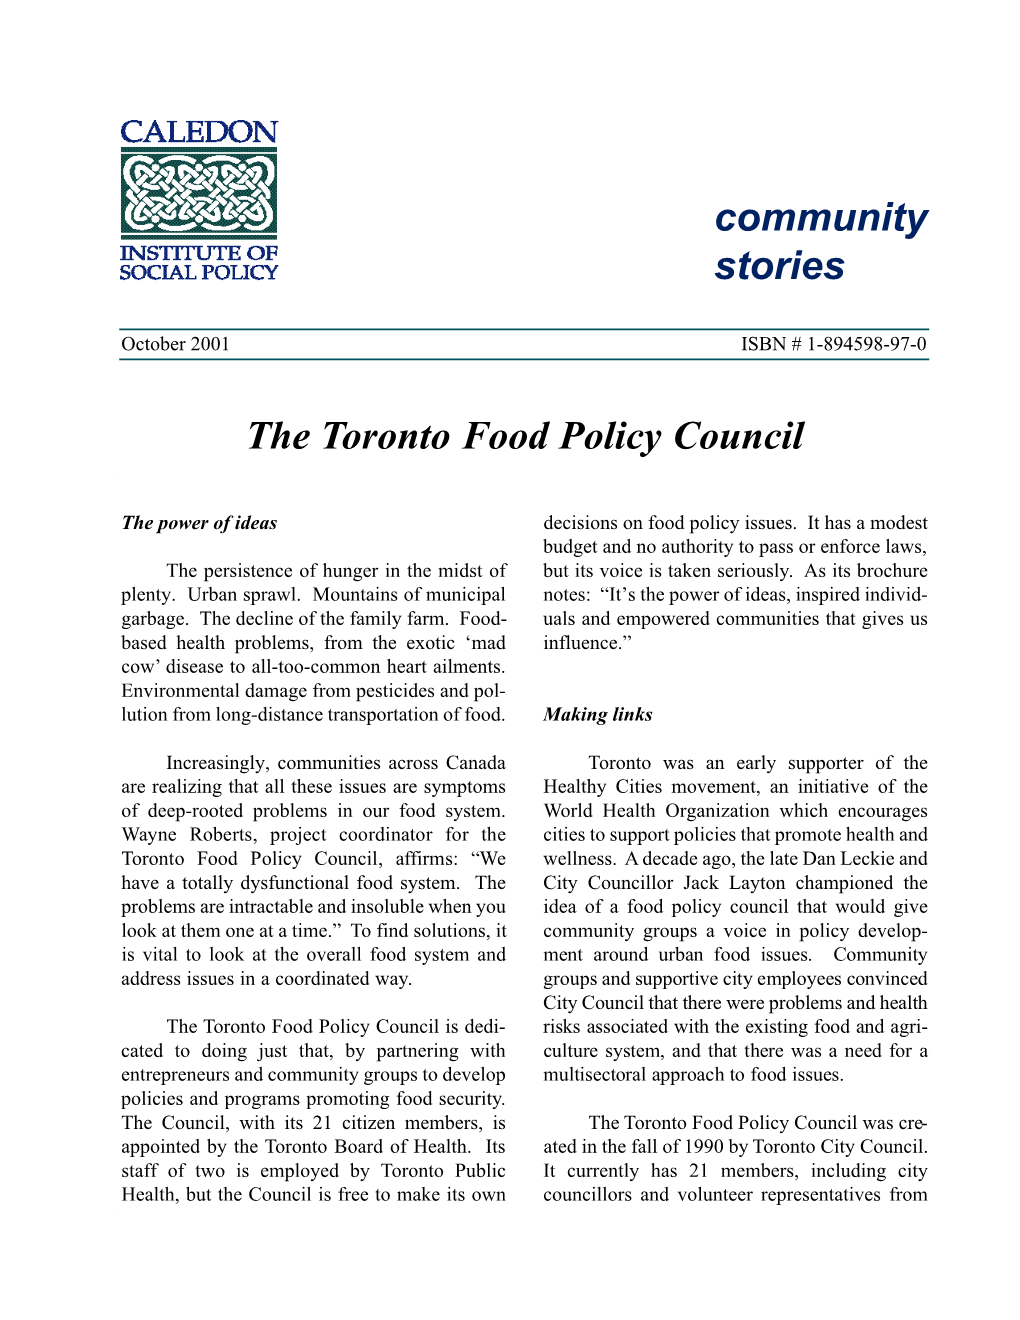 The Toronto Food Policy Council Community Stories